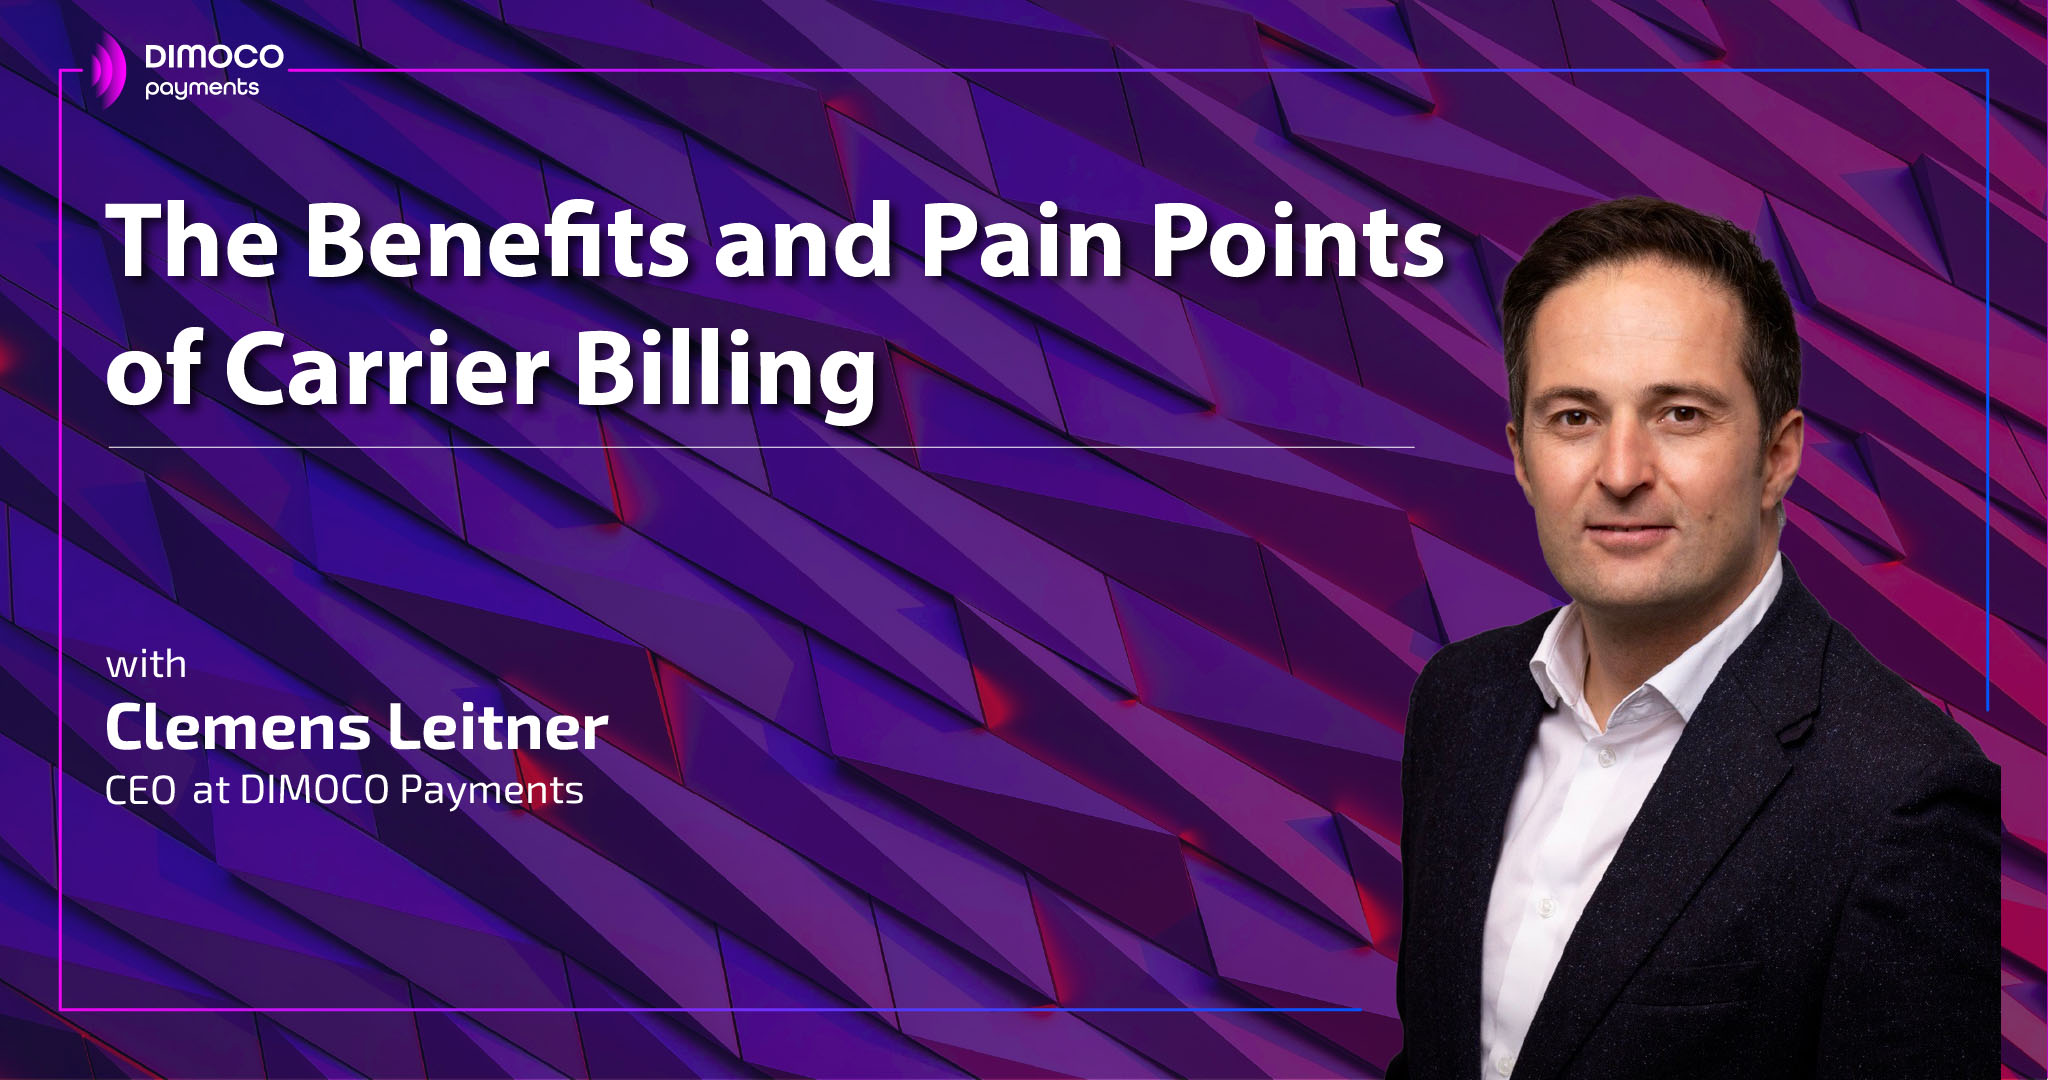 Benefits of Carrier Billing with Clemens Leitner Graphic